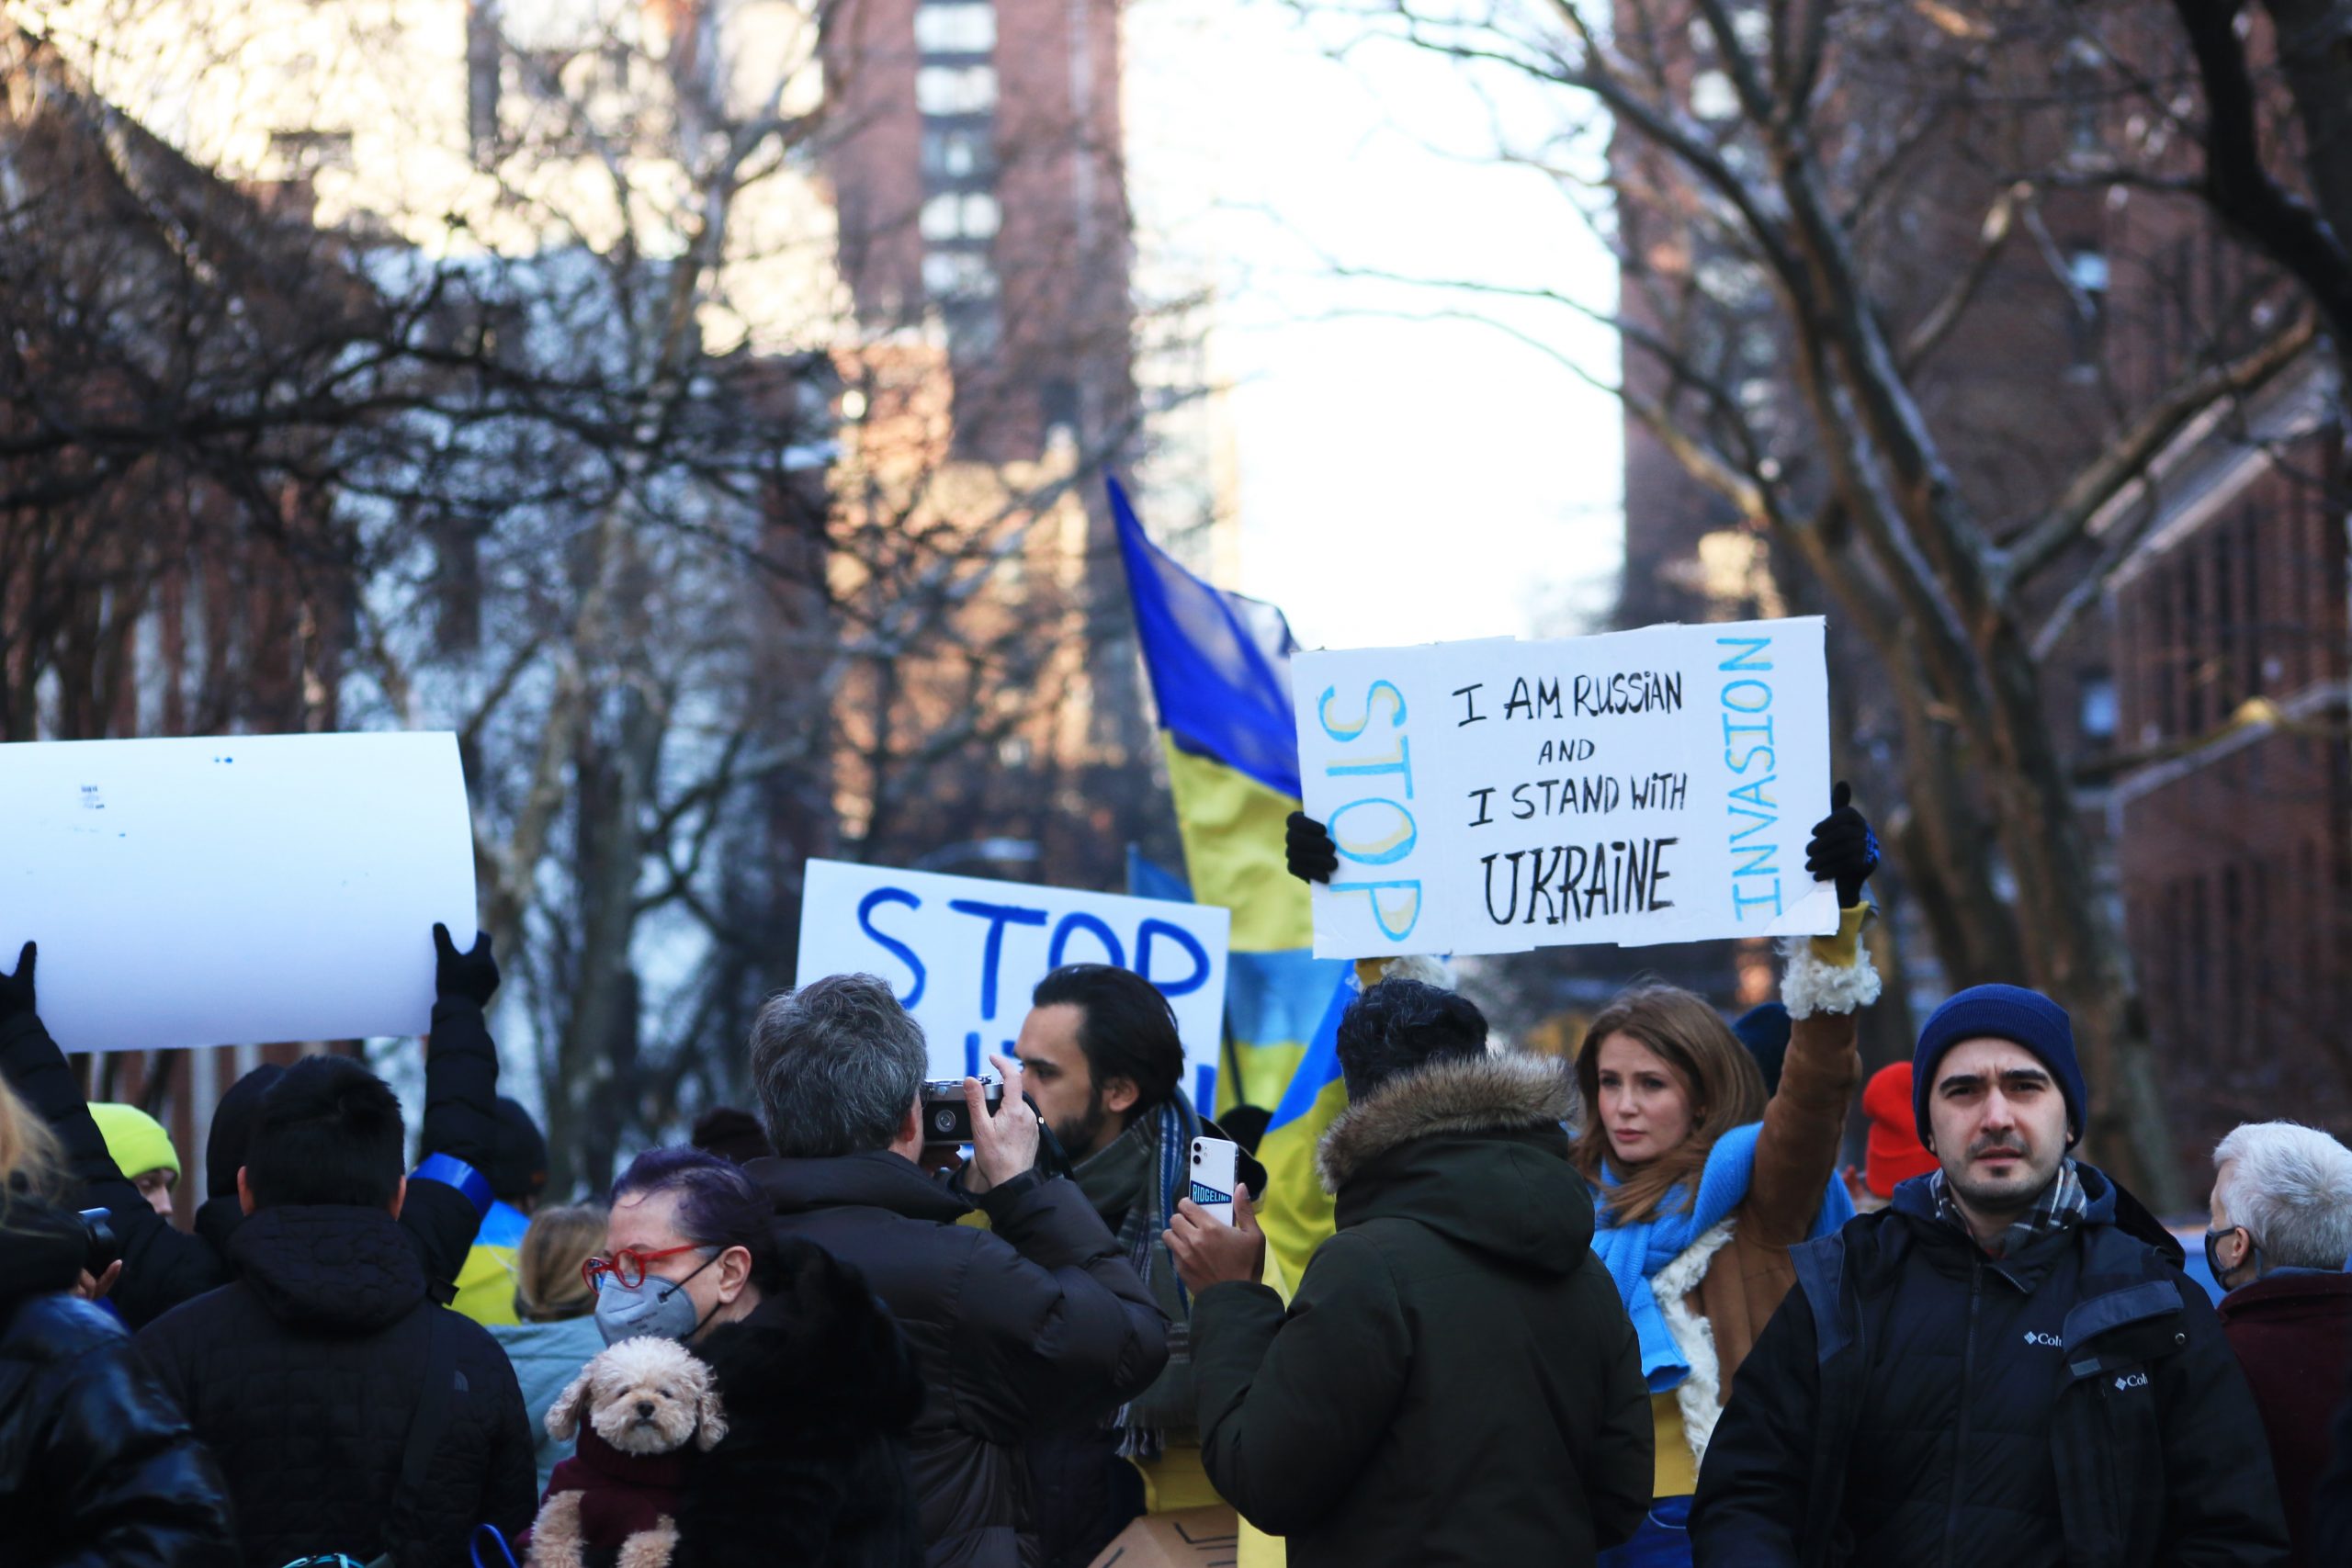 Protesters gathered outside of Russian Consulate in uptown New York City to protest Russian's invasion in Ukraine.